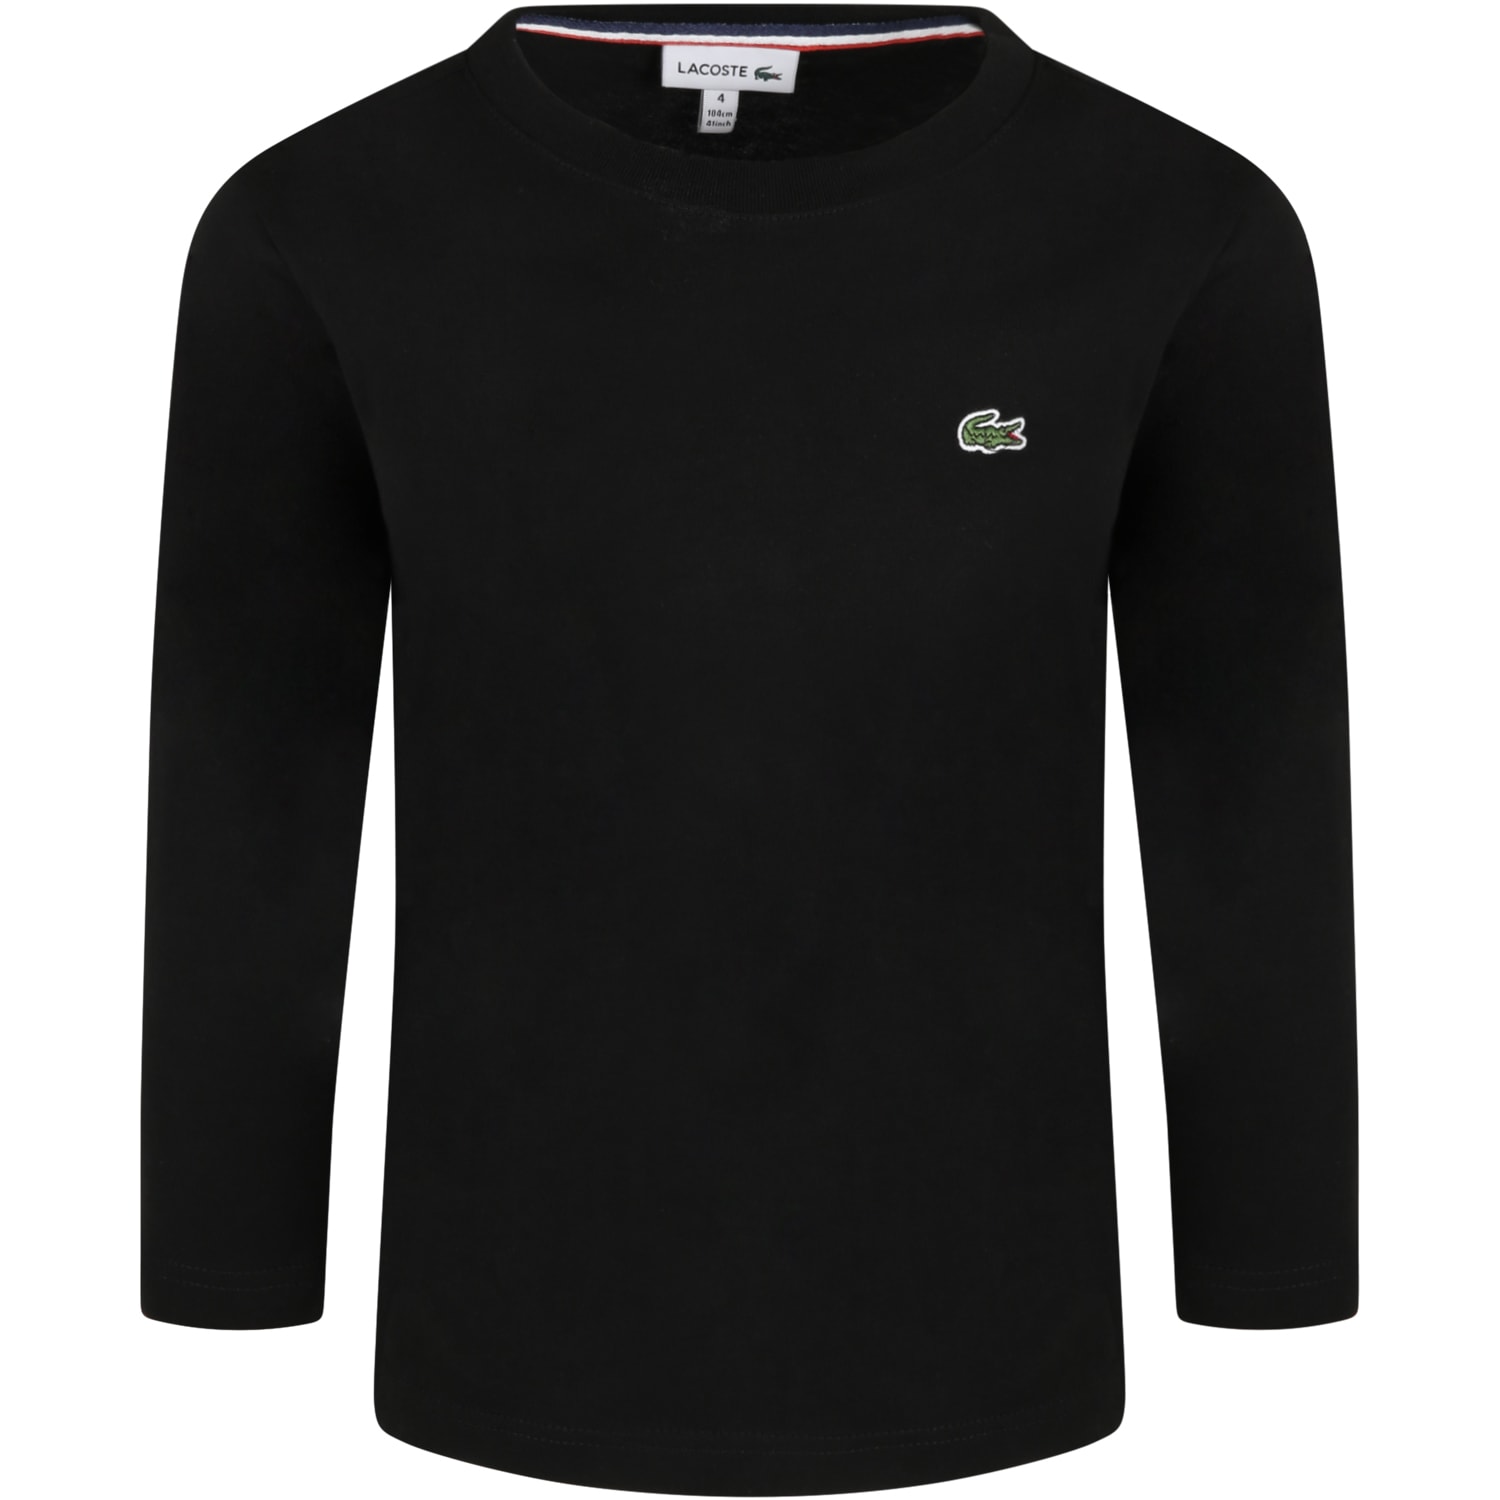 Lacoste Black T-shirt For Boy With Iconic Crocodile